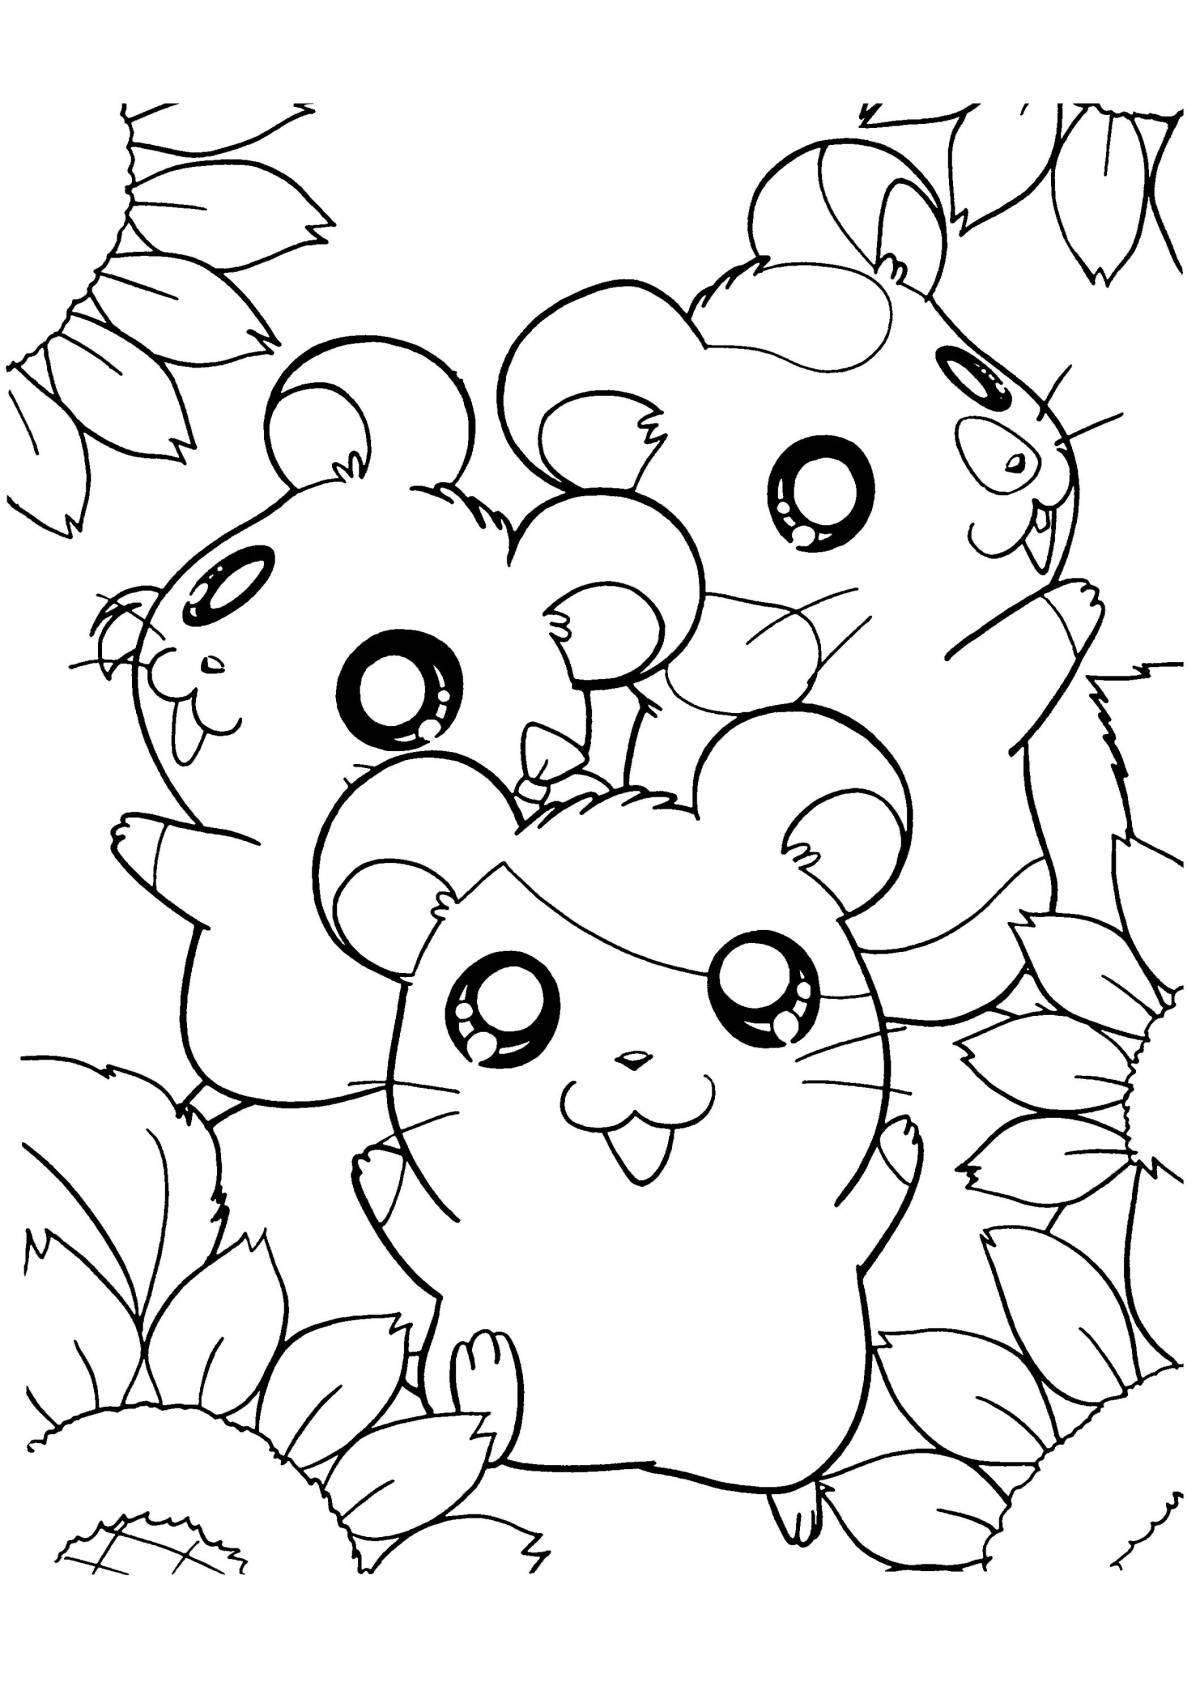 Incredible coloring book for girls cute fluffies